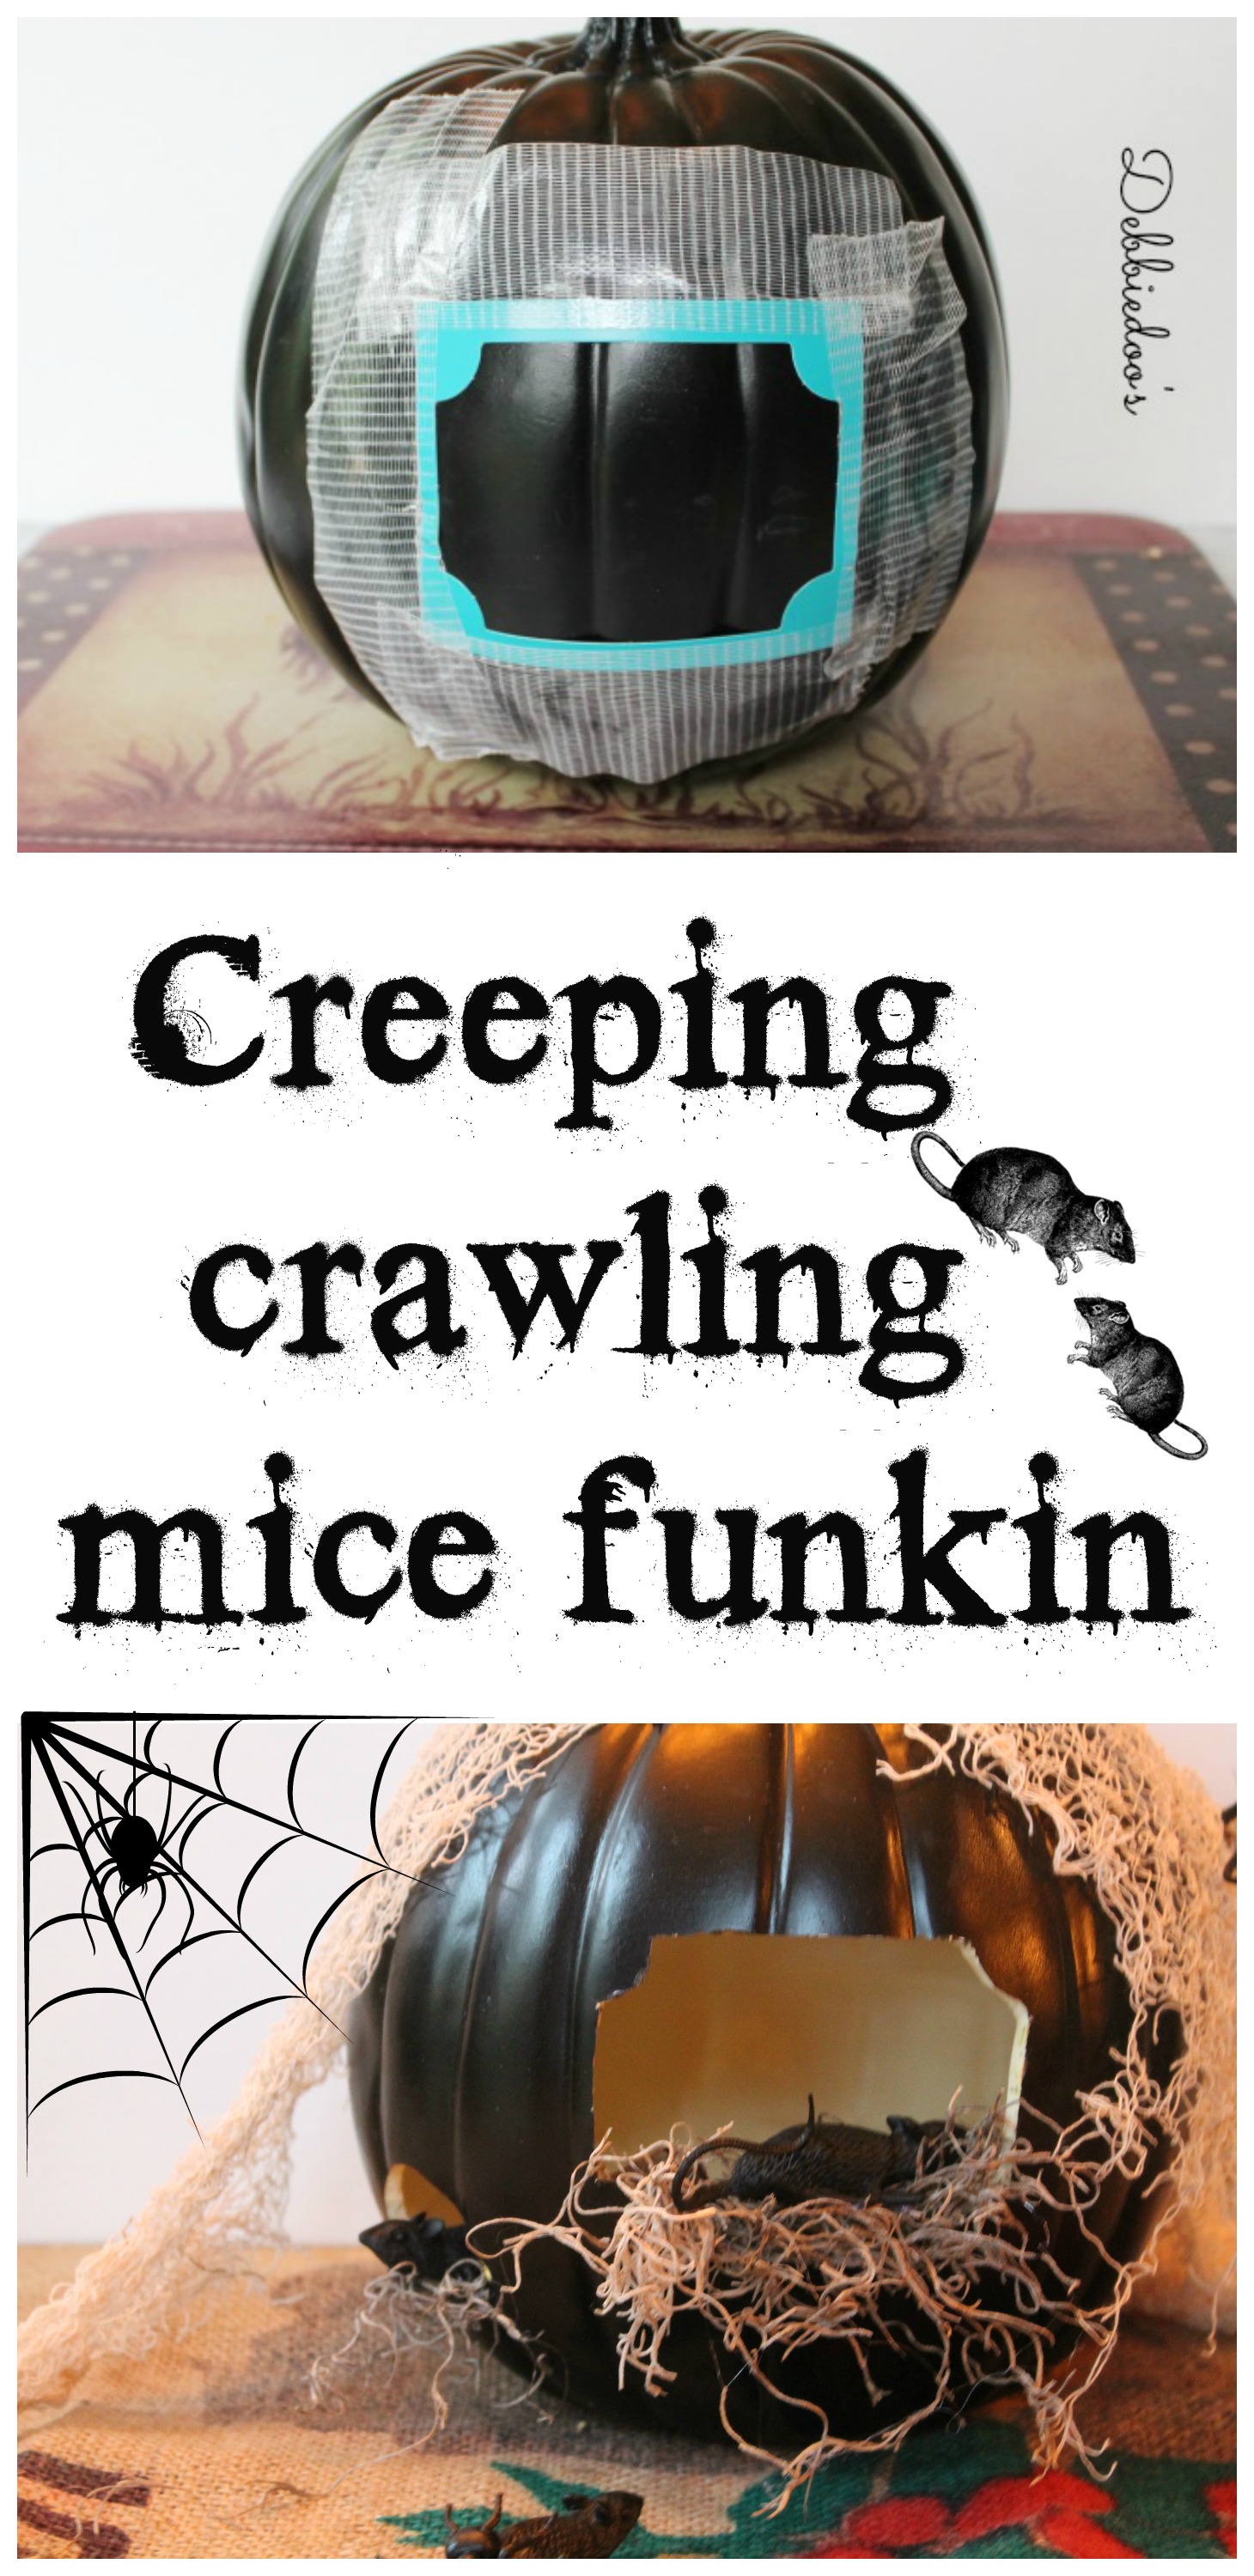 How to make a creeper funkin with mice